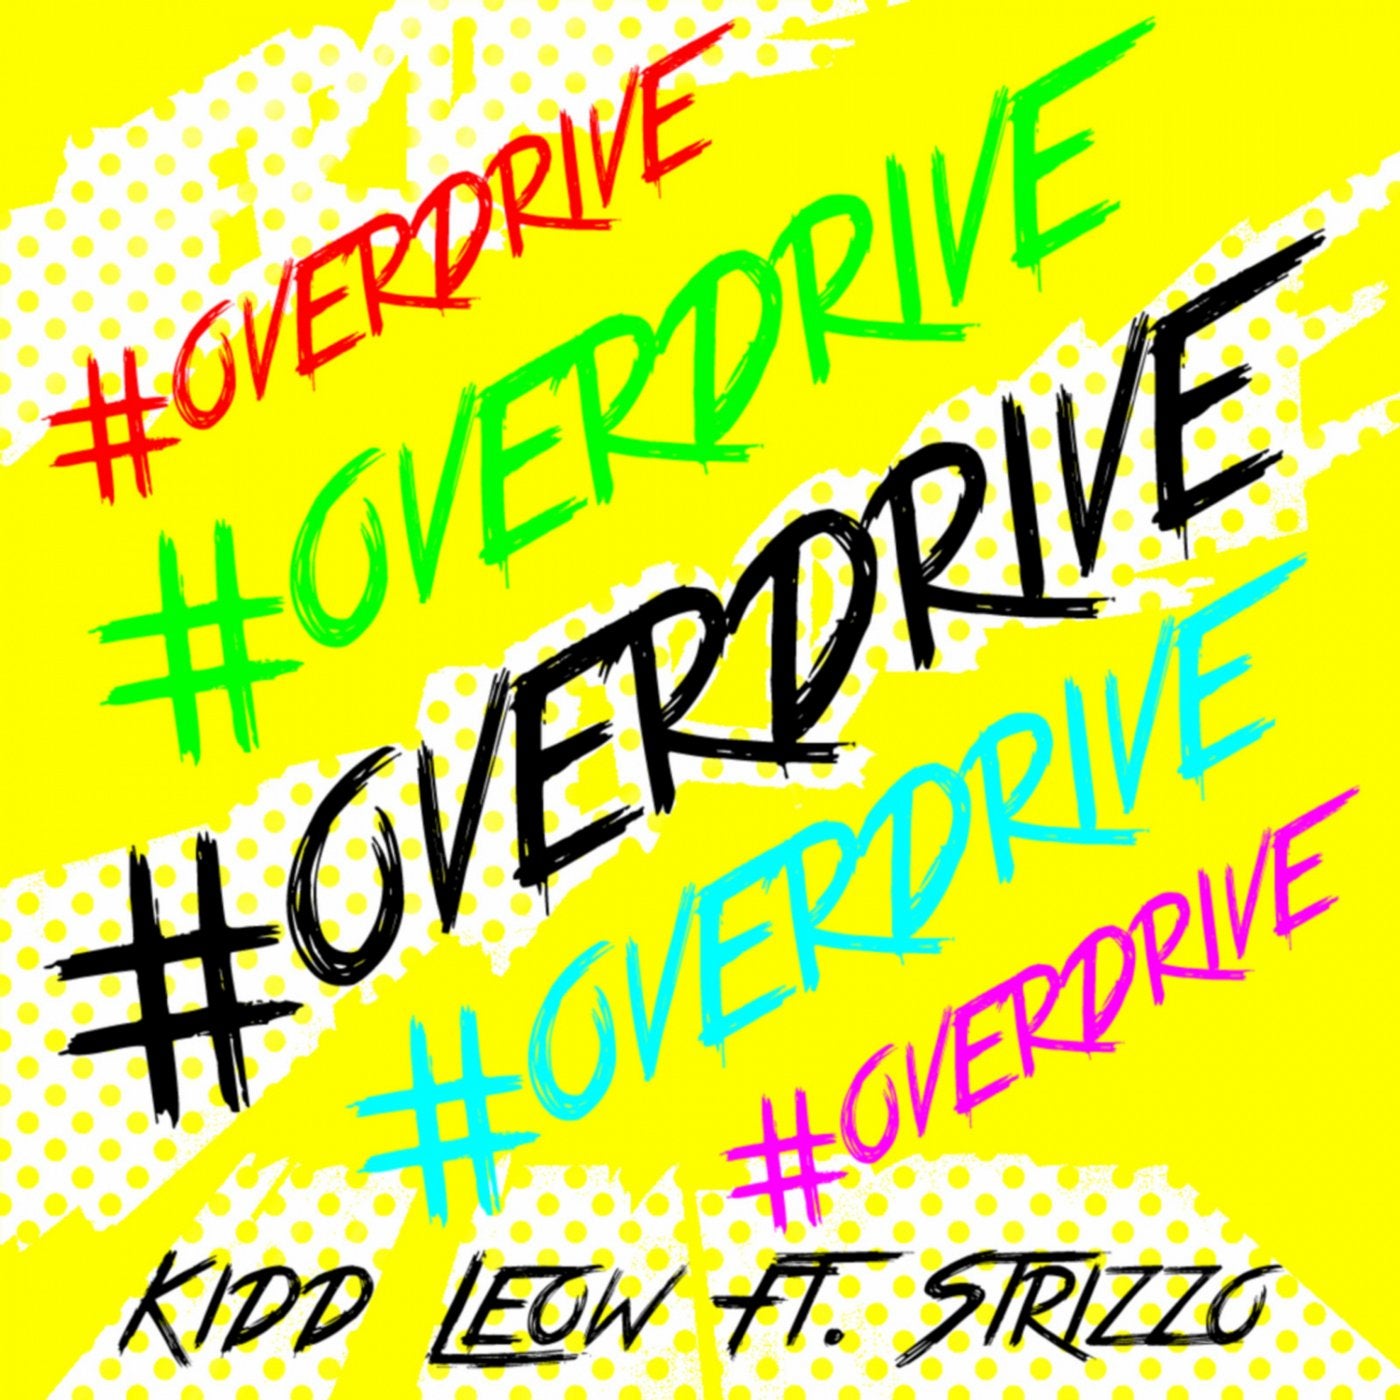 #OverDrive (feat. Strizzo)